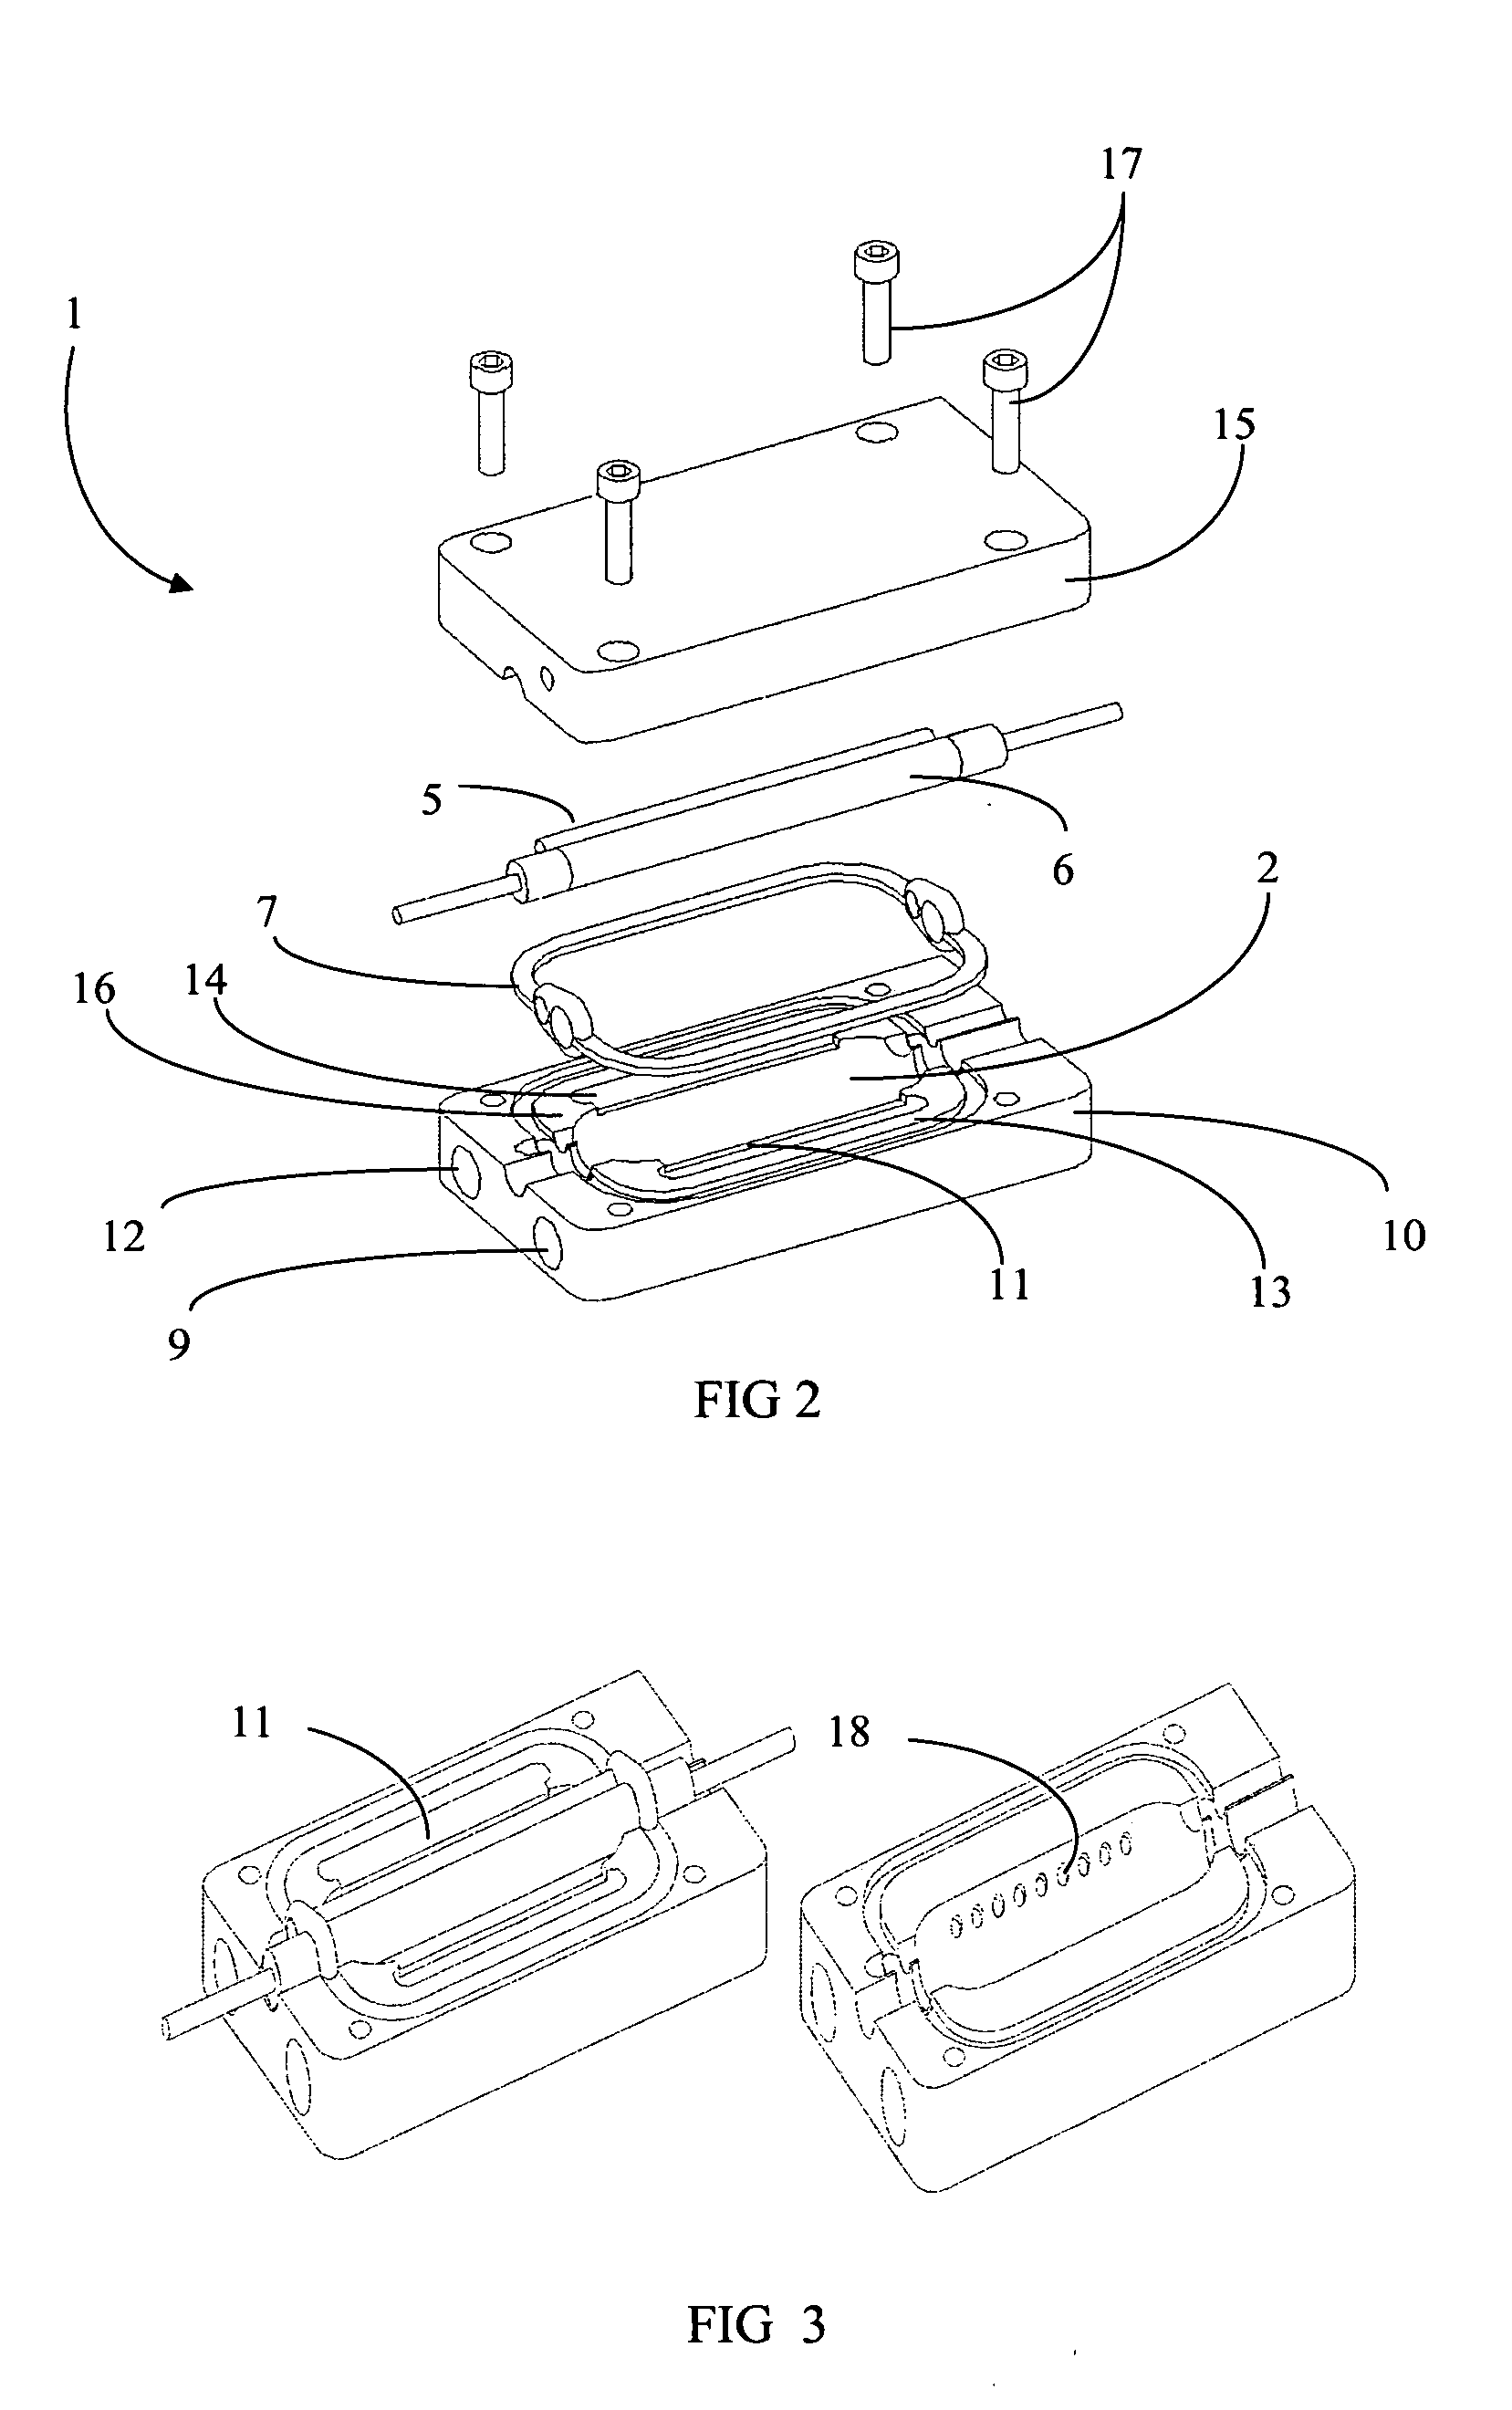 Integrated laser cavity with transverse flow cooling